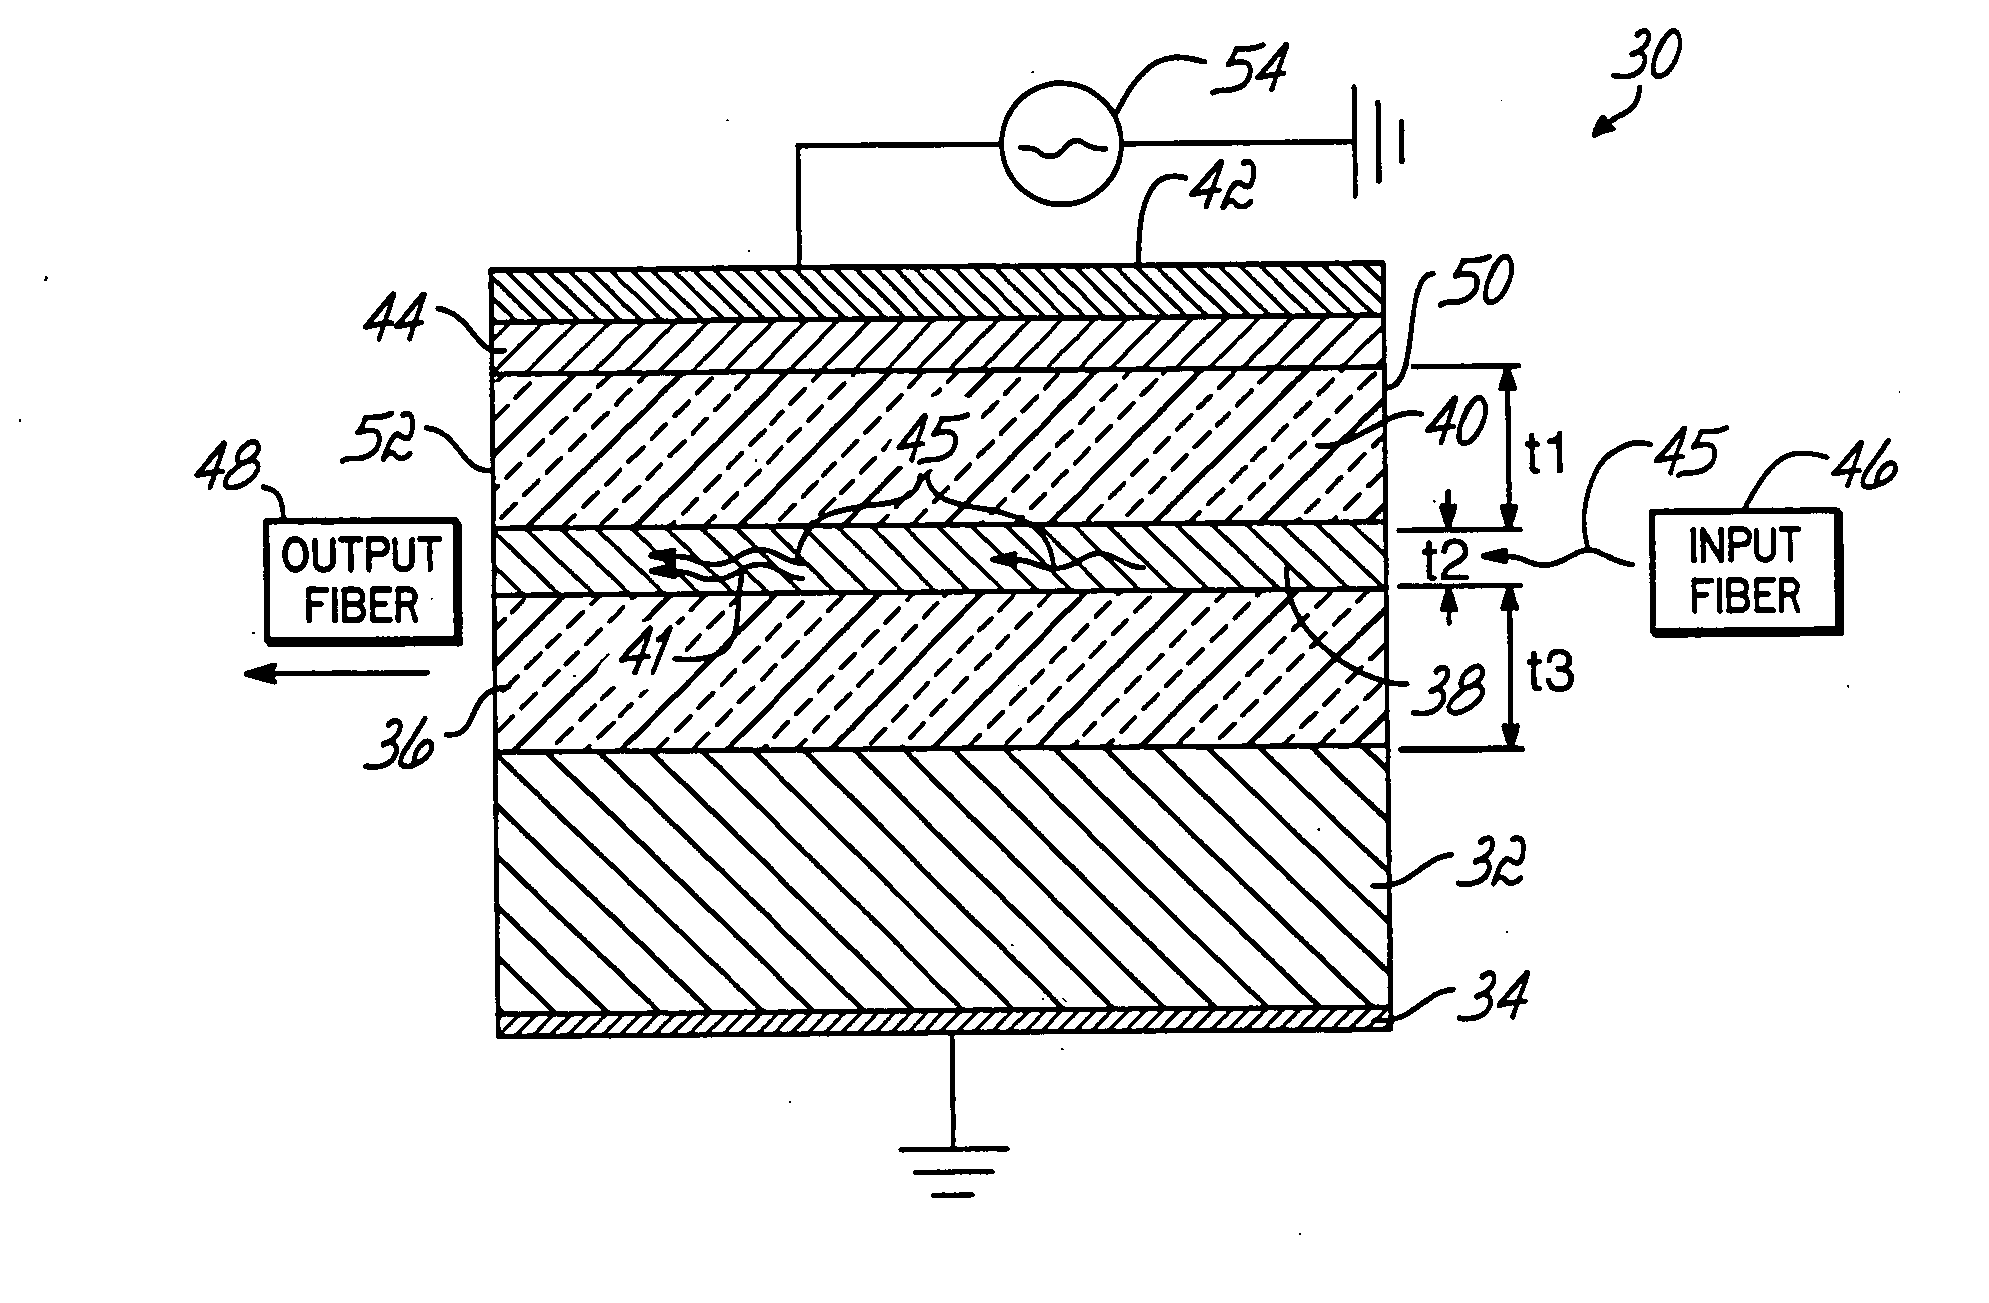 Impurity-based electroluminescent waveguide amplifier and methods for amplifying optical data signals